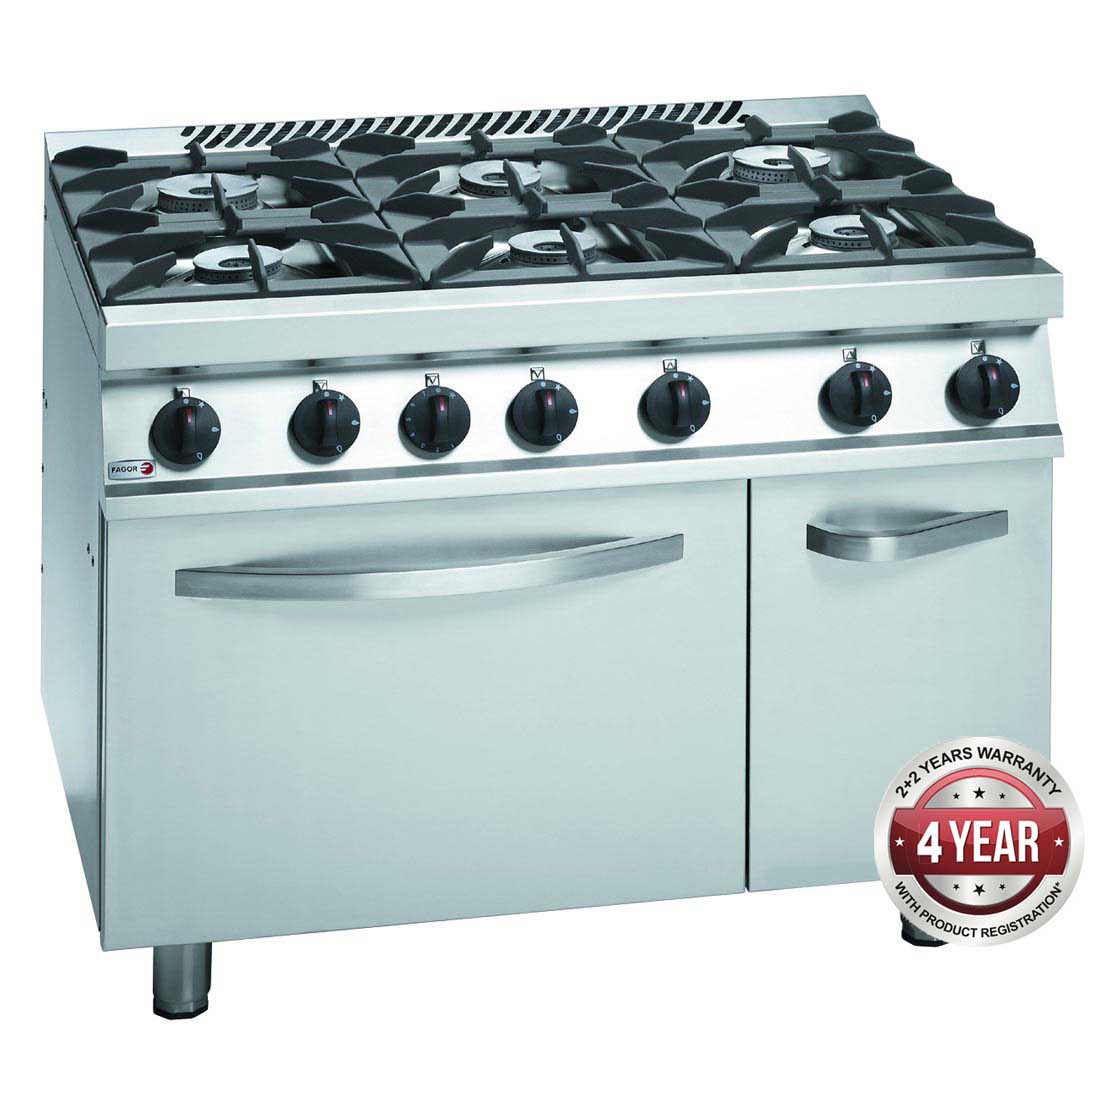 Fagor 700 Series Natural Gas 6 Burner With Gas Oven And Neutral Cabinet Under CG7-61H Oven Ranges